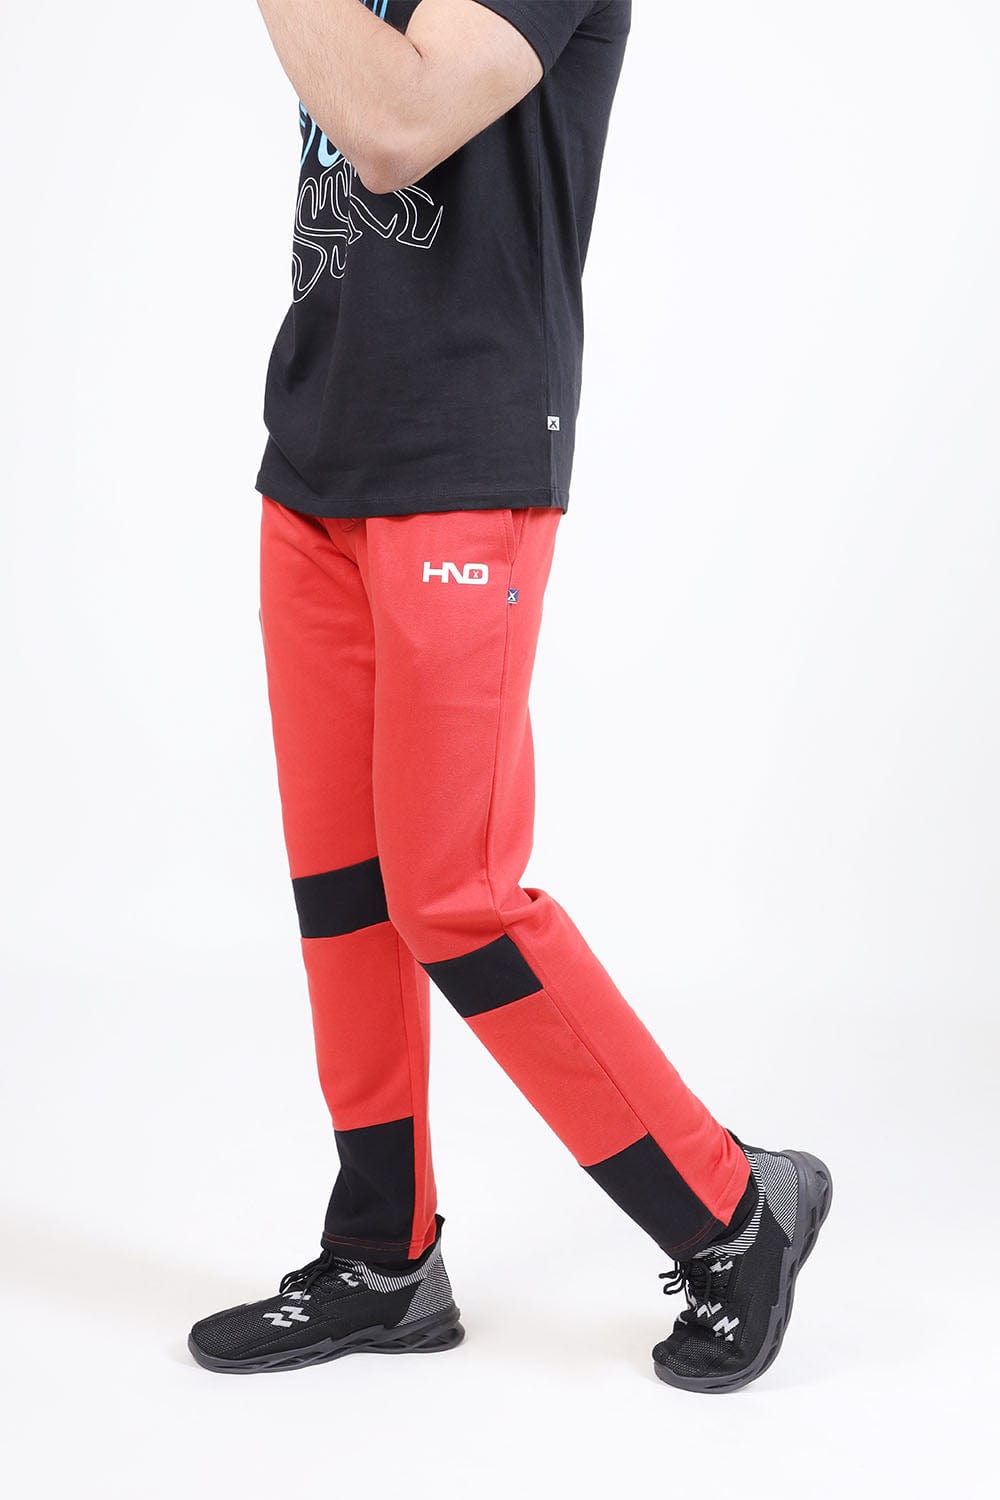 Hope Not Out by Shahid Afridi Men Trouser Man Red Fashion Trouser